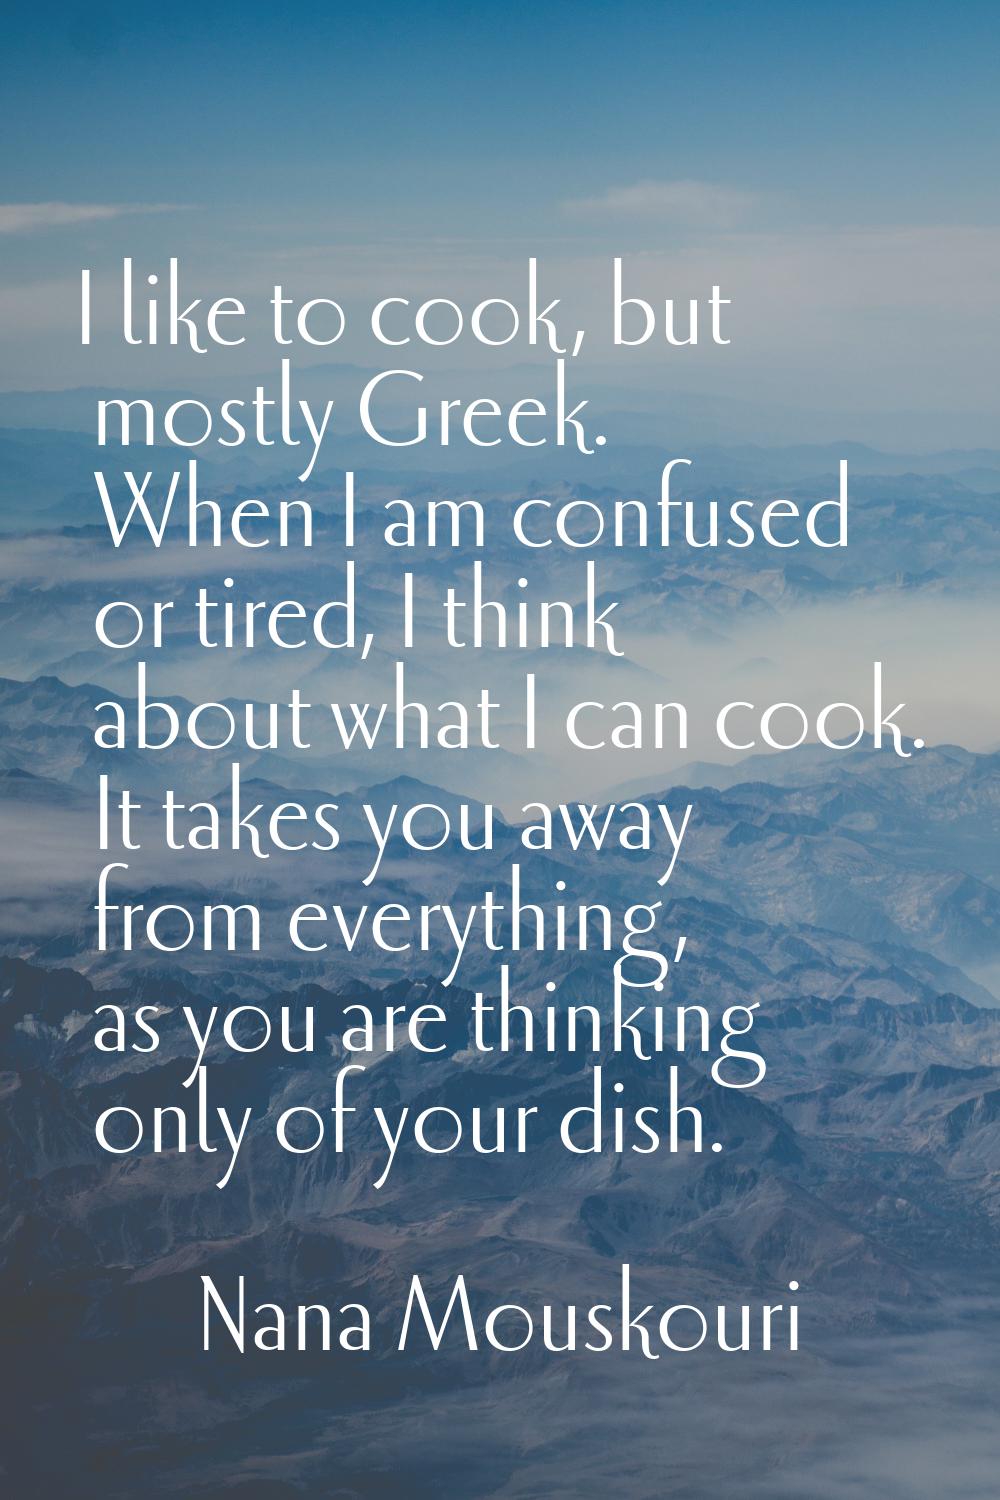 I like to cook, but mostly Greek. When I am confused or tired, I think about what I can cook. It ta